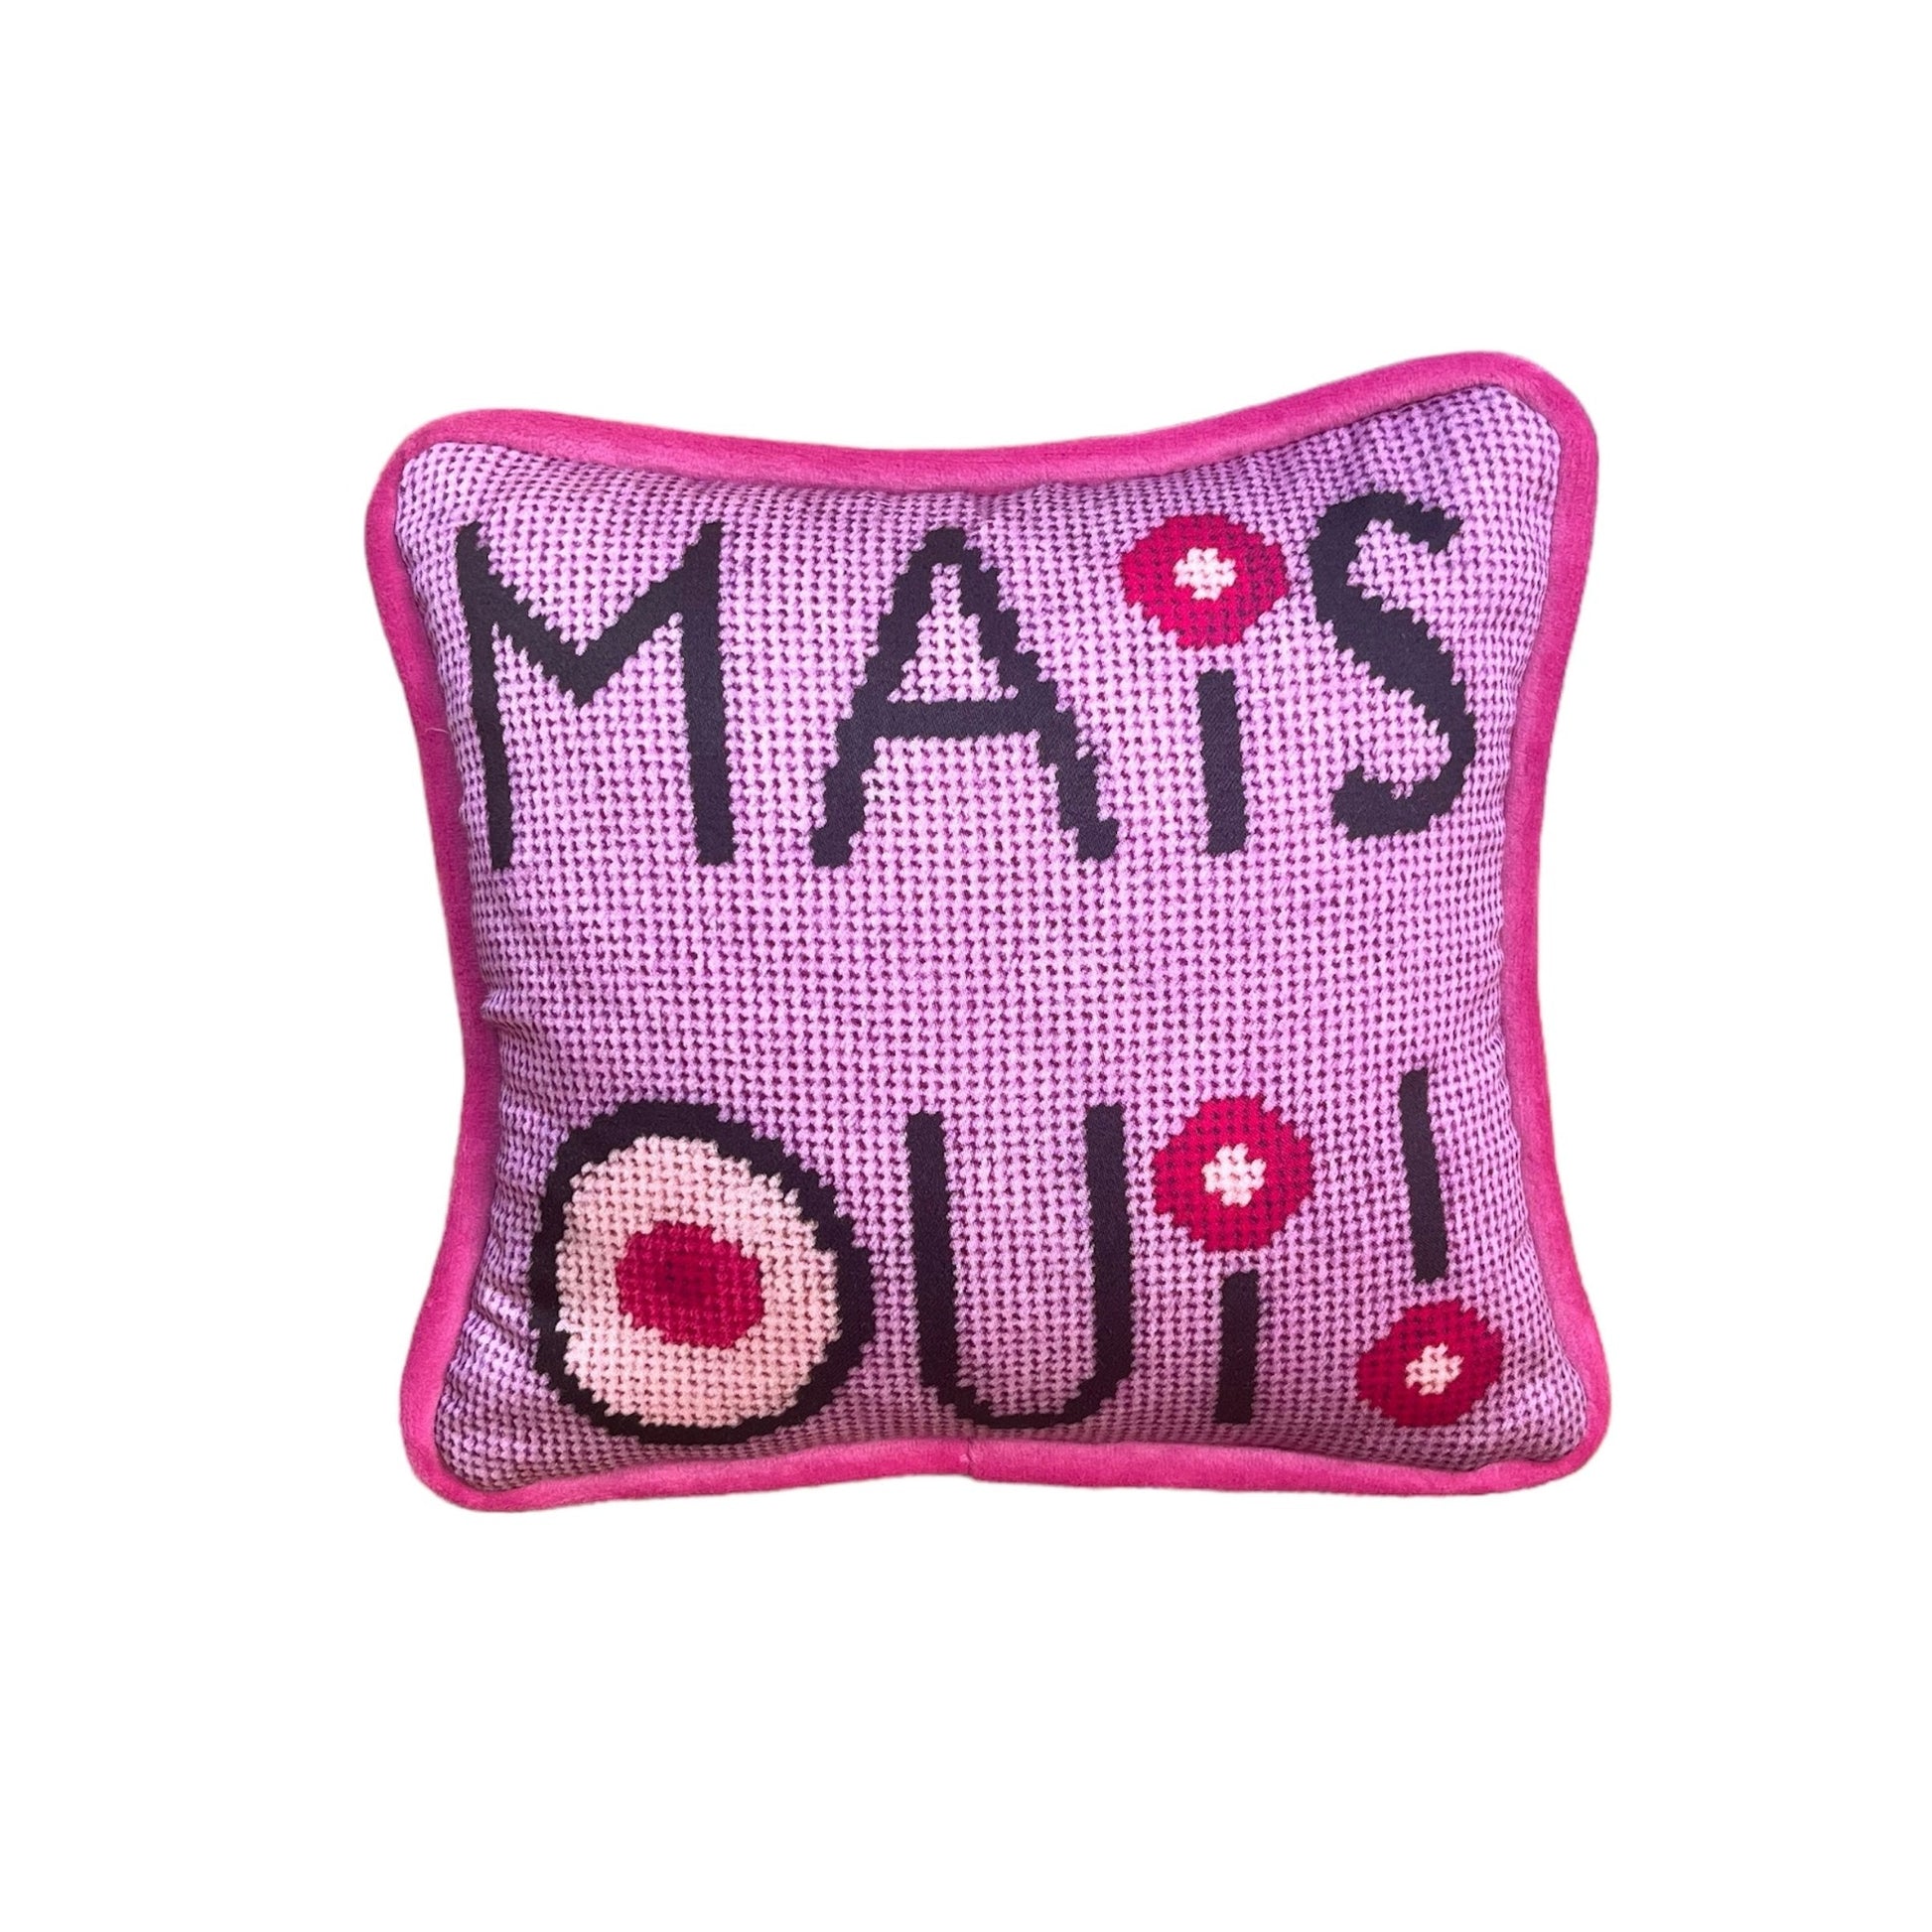 mais oui black stacked text with I dot and O that have cream colored centers with pink circles. Lavender pink background.